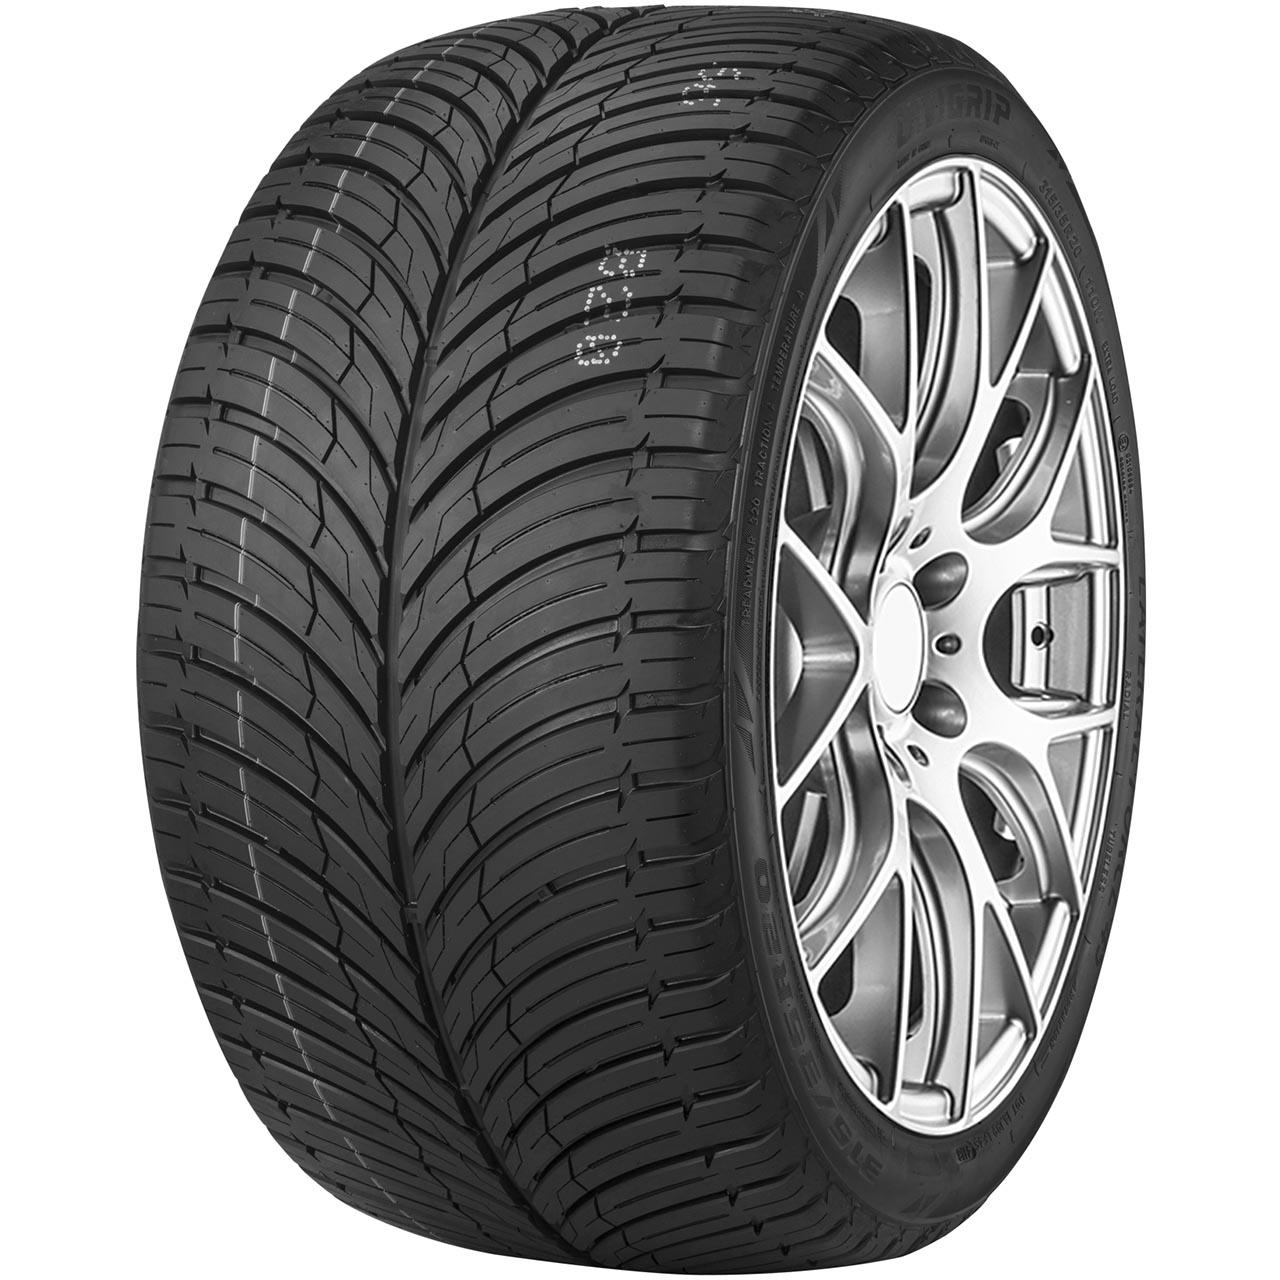 Unigrip Lateral Force 4S 245/50R18 100W